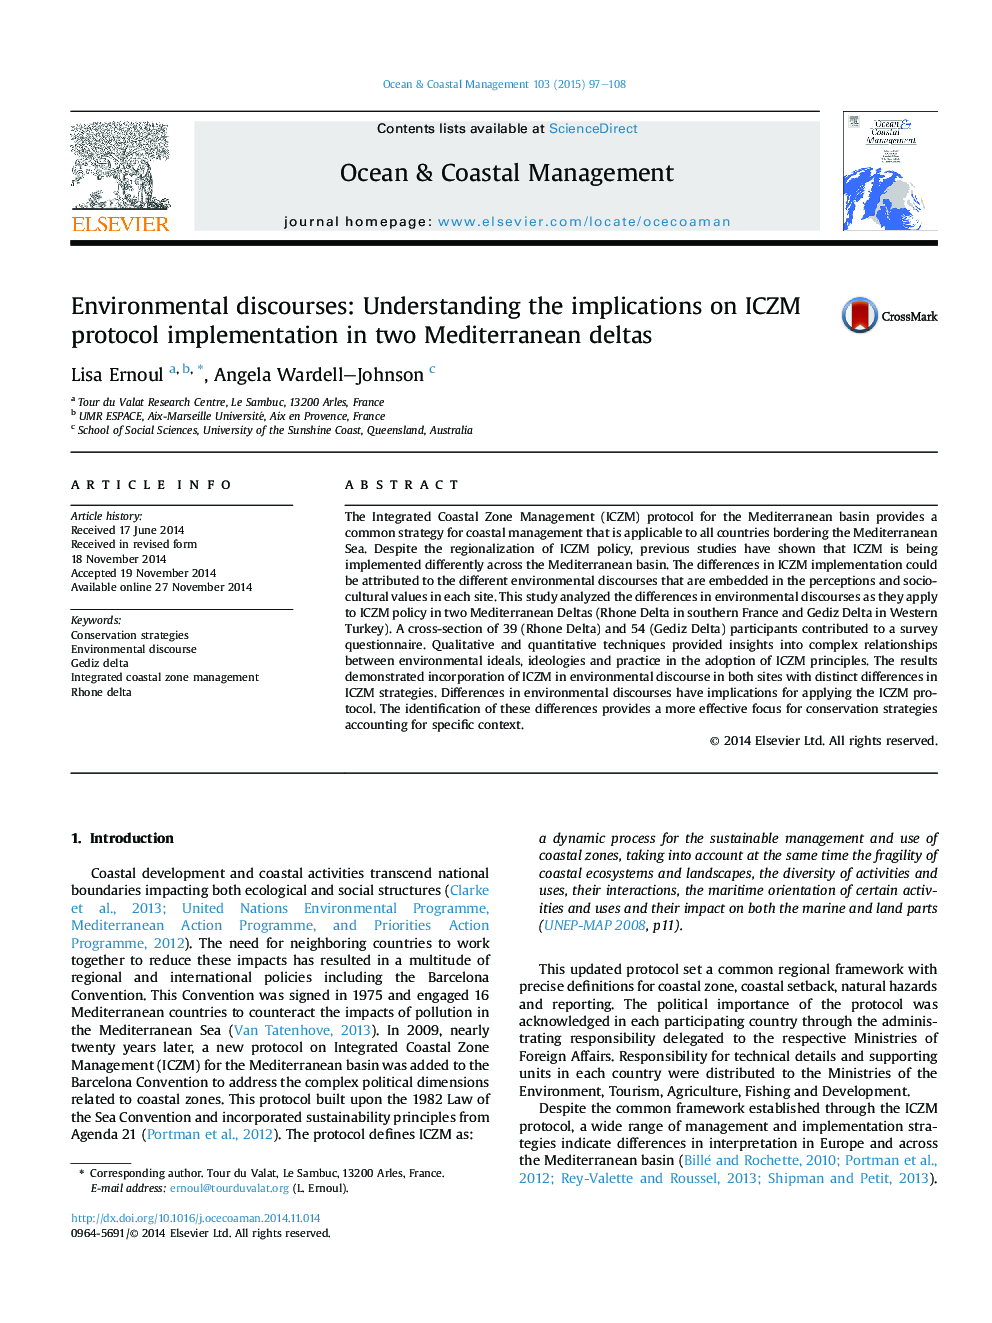 Environmental discourses: Understanding the implications on ICZM protocol implementation in two Mediterranean deltas